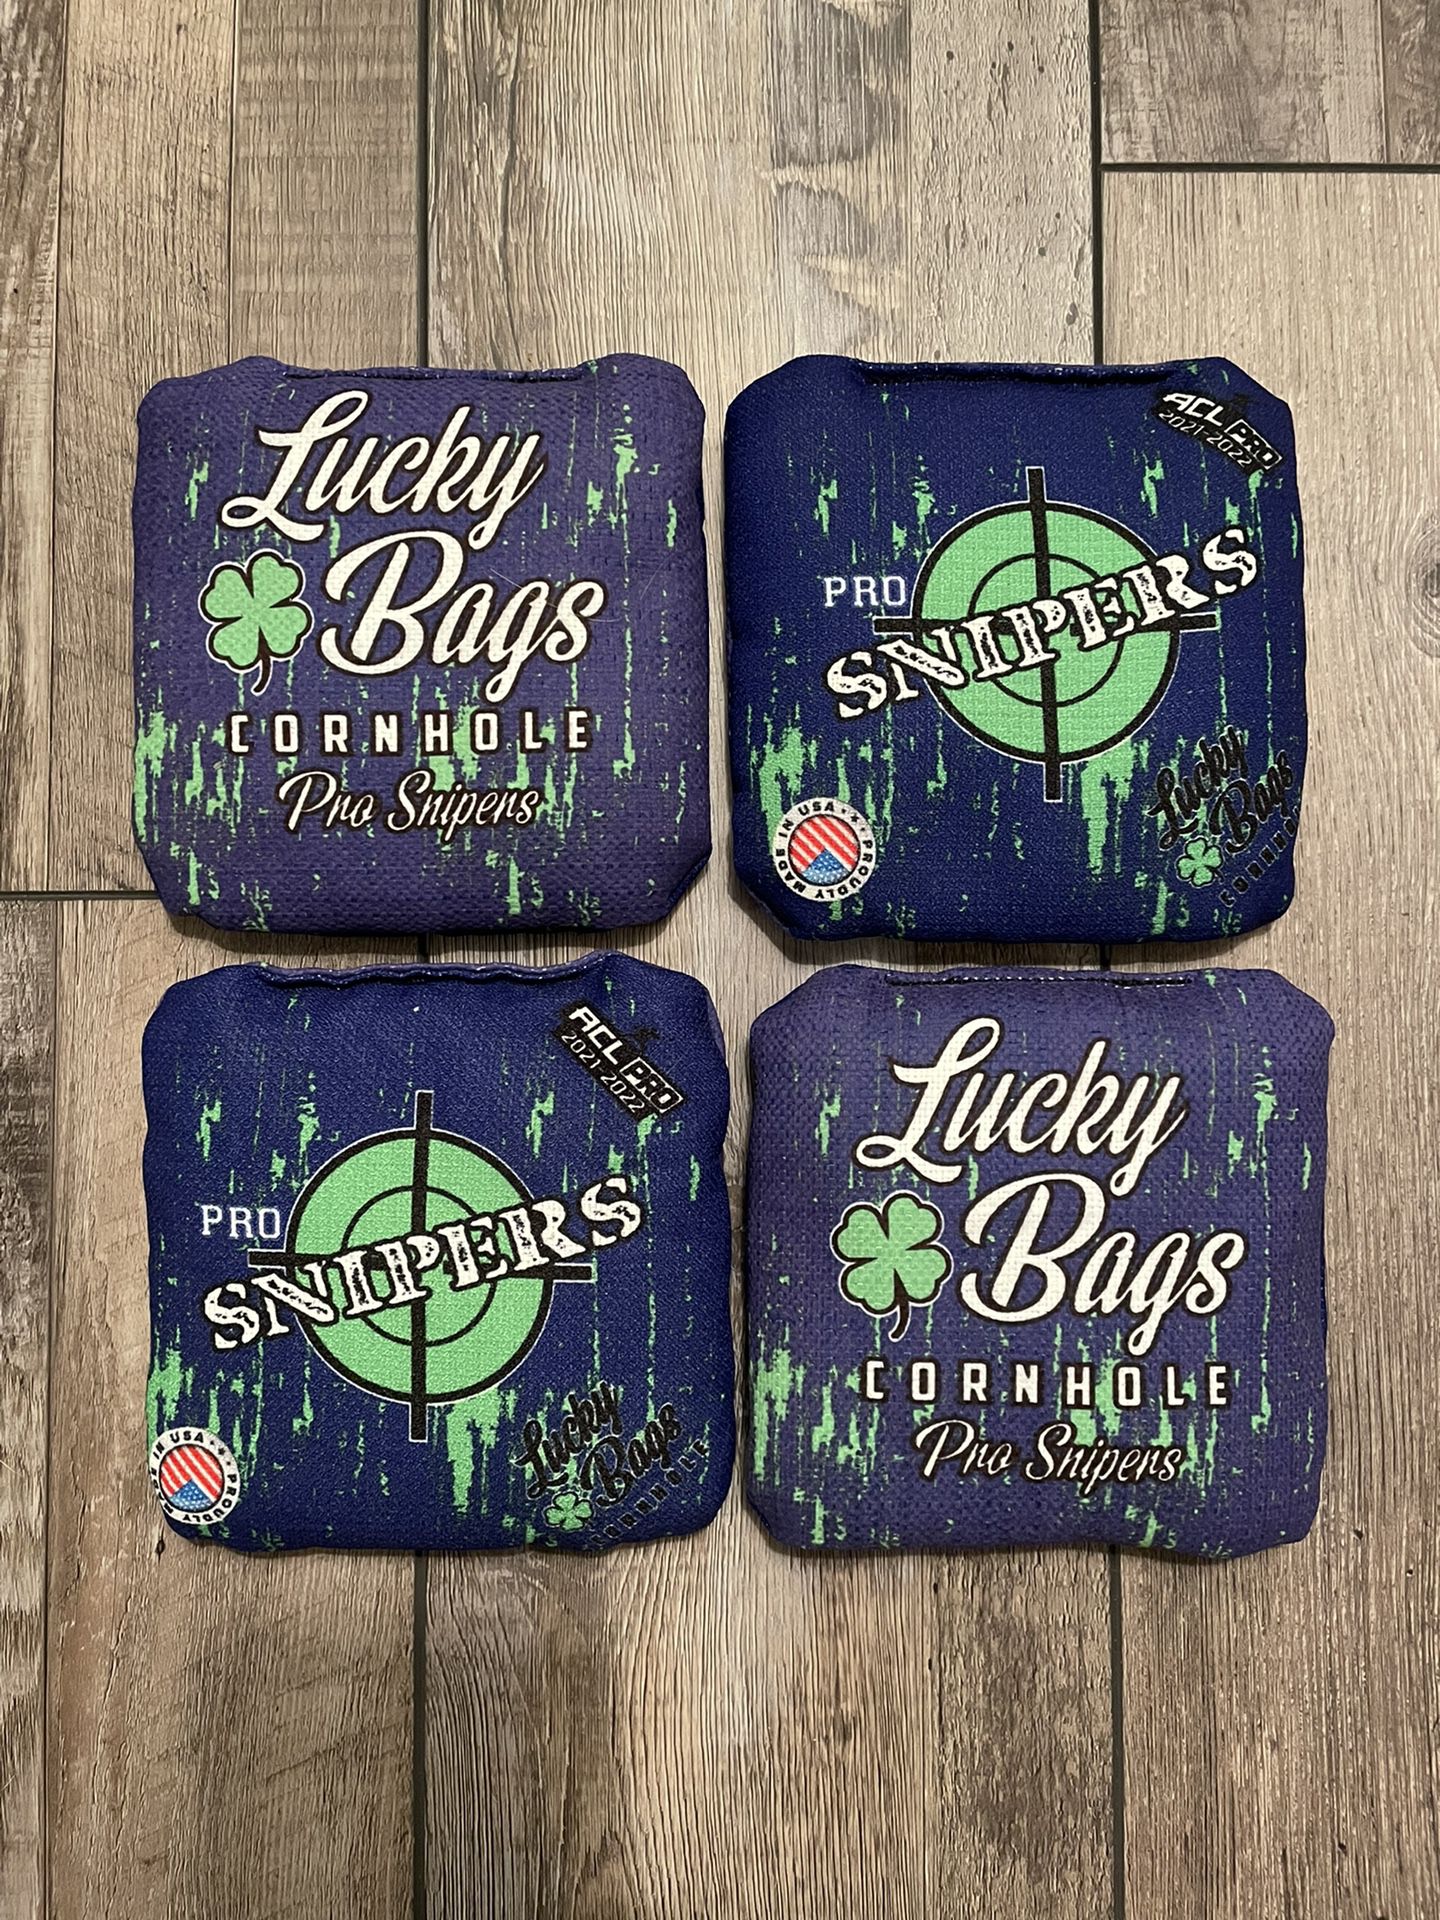 Lucky Bags Cornhole-Glitch Pro Snipers-ACL Pro Stamped-Navy/Purple and Green 